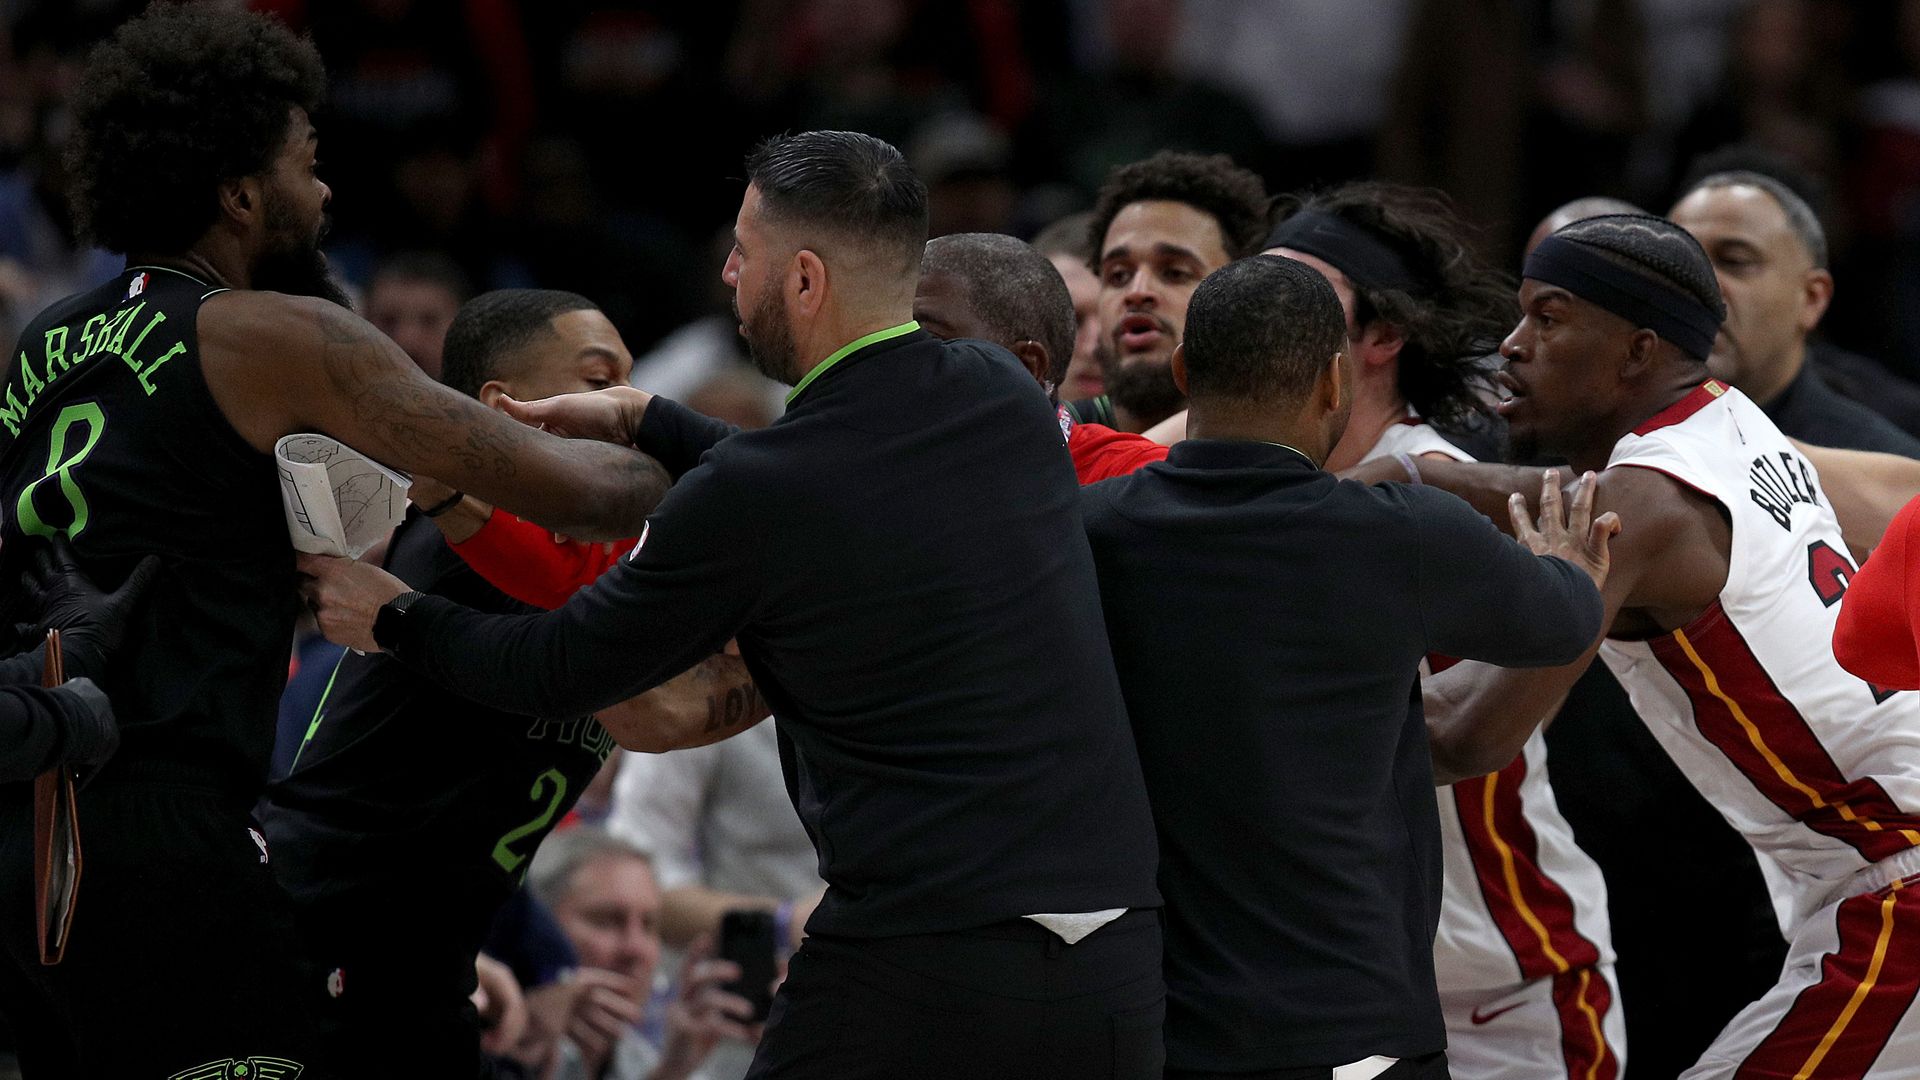 Players from the New Orleans Pelicans and the Miami Heat are restrained during an on-court fight during a game.